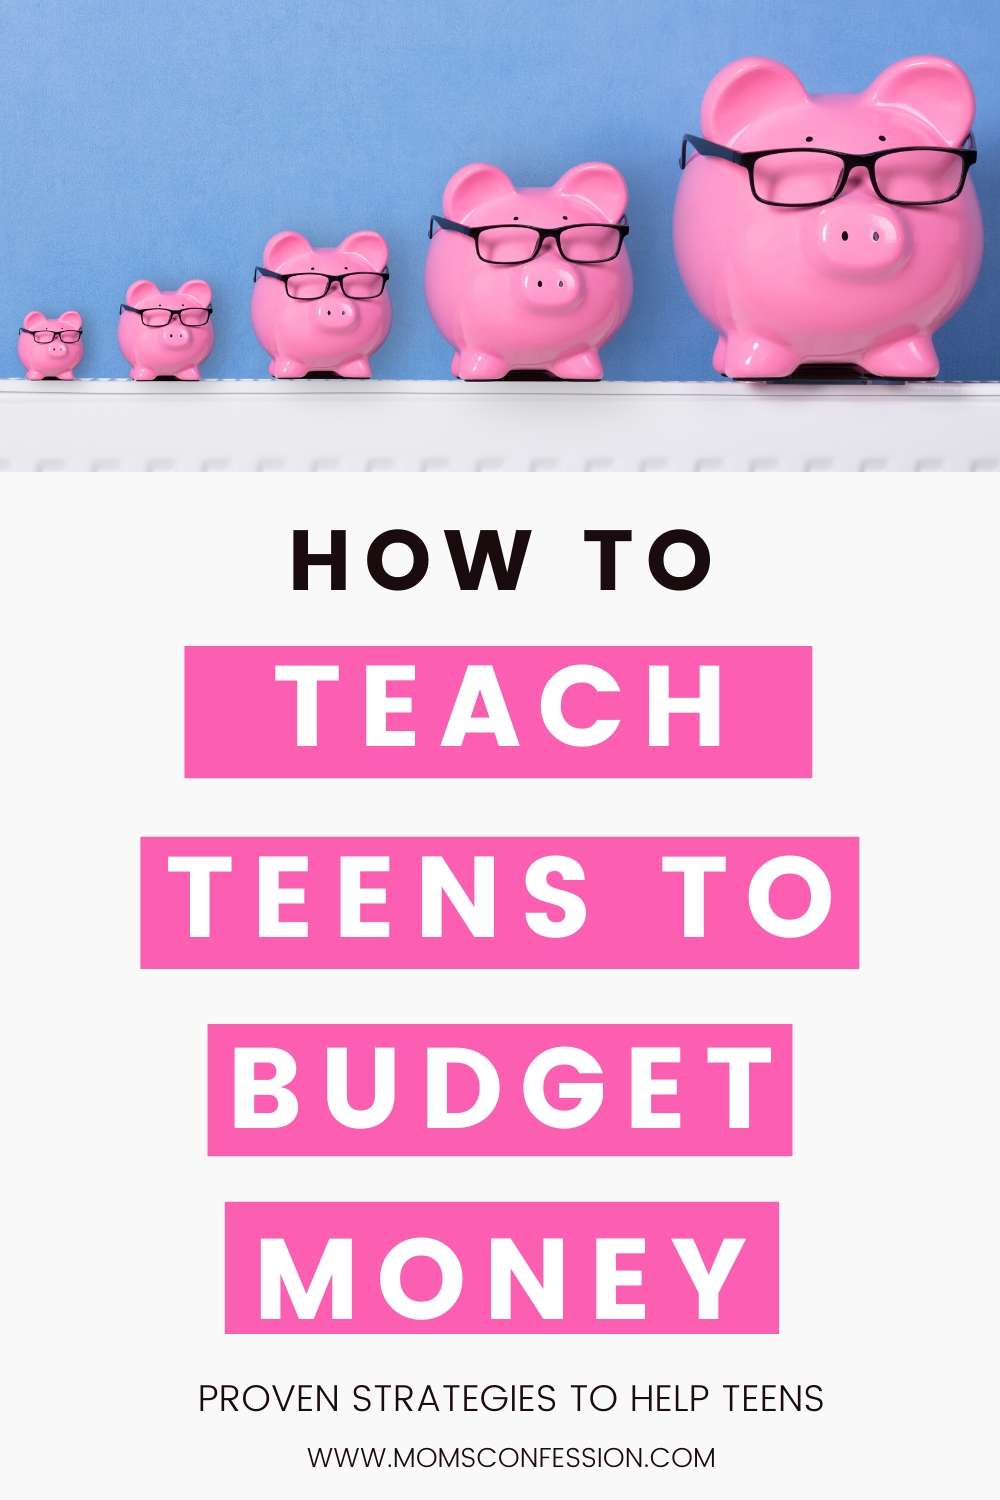 How to Teach Teens to Budget Money